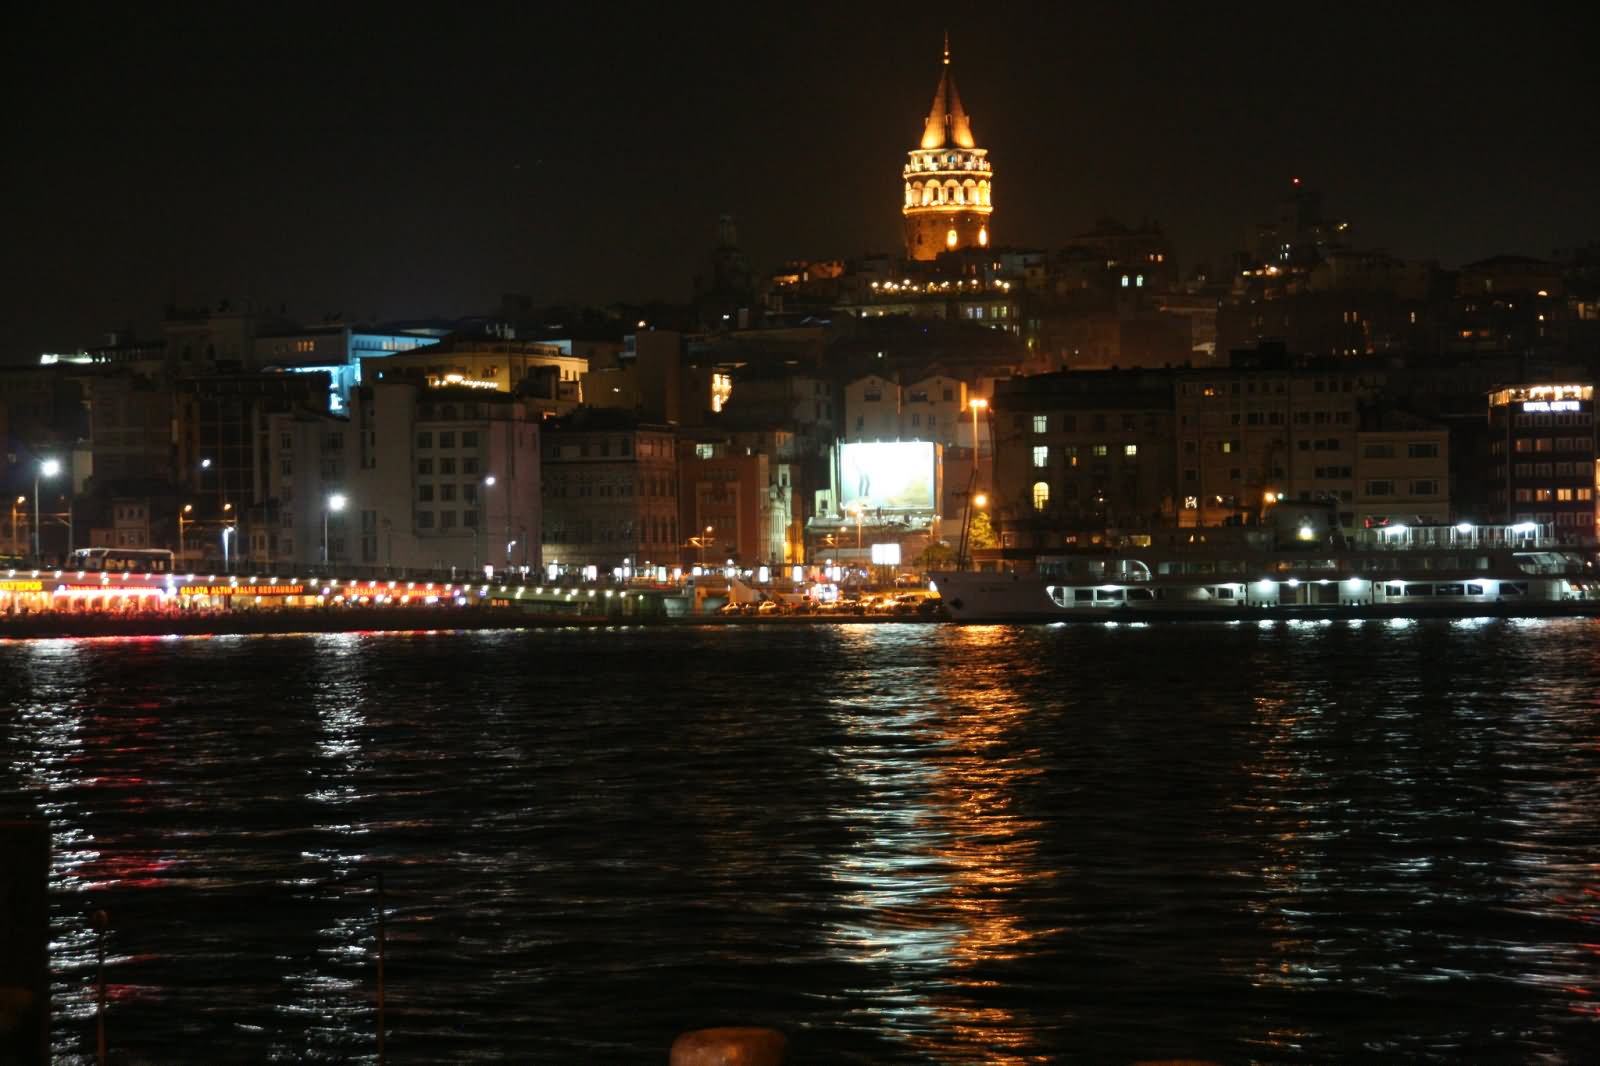 Water Reflection Of Galata Tower In Bosphorus River